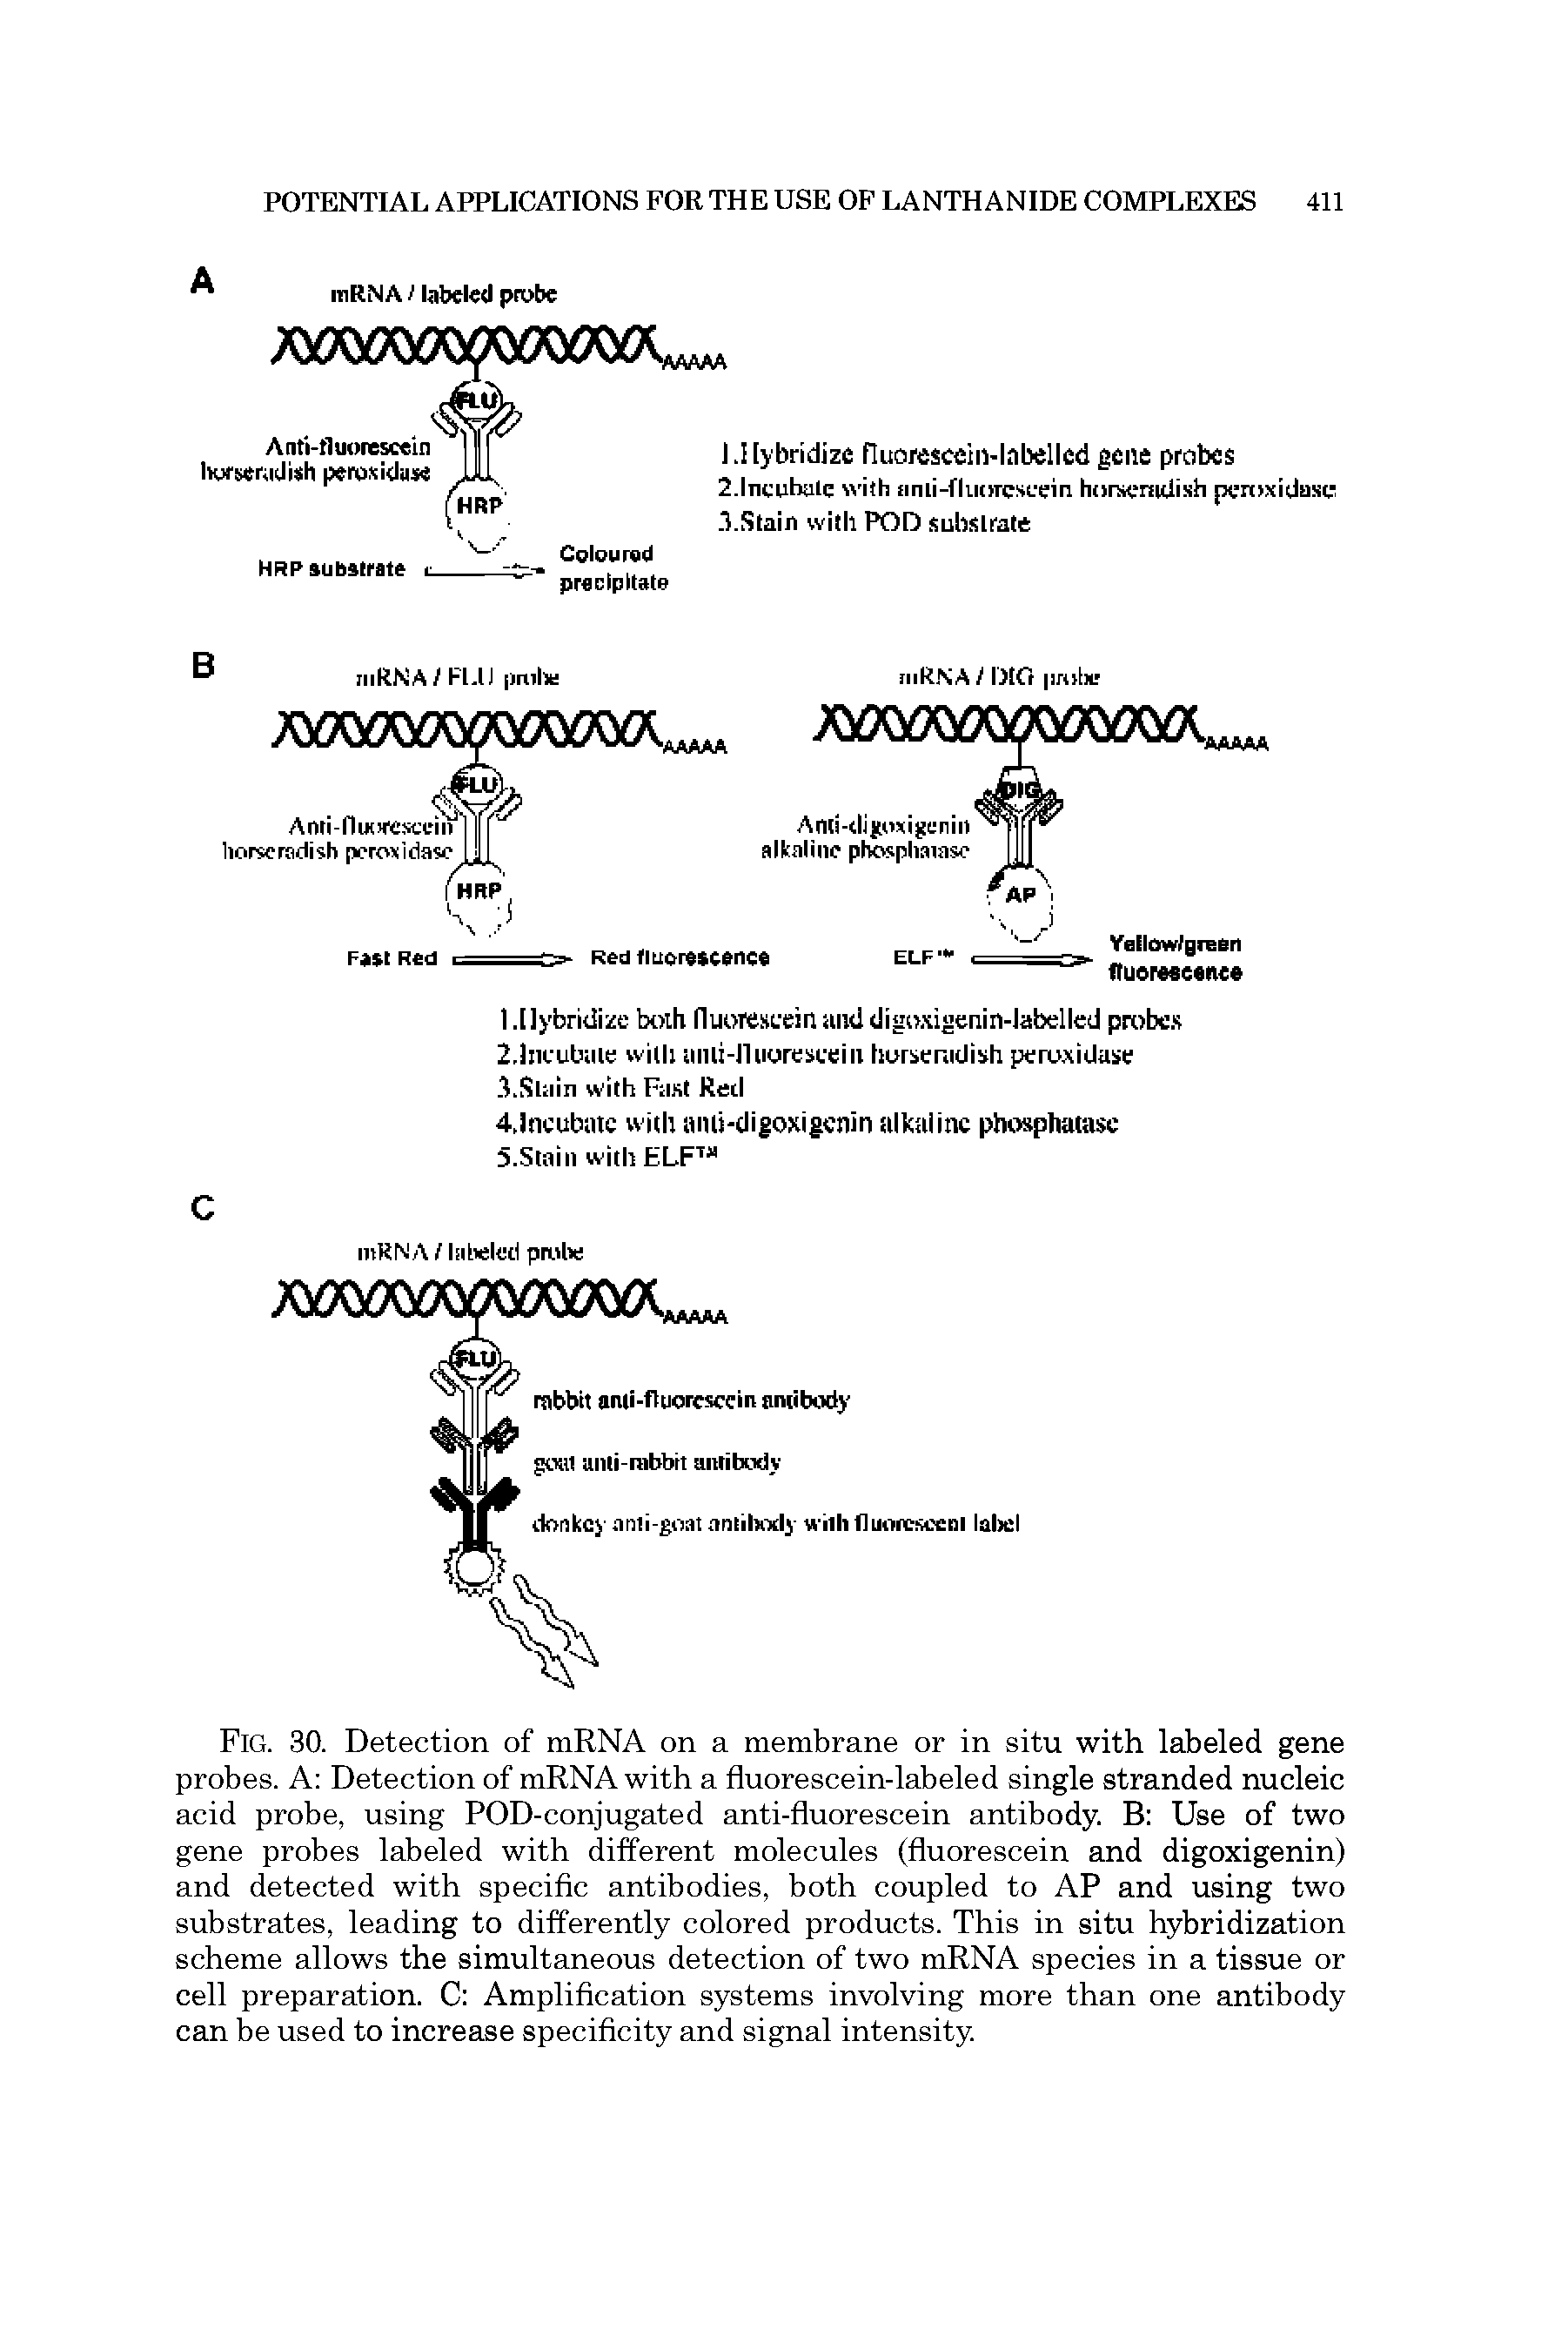 Fig. 30. Detection of mRNA on a membrane or in situ with labeled gene probes. A Detection of mRNA with a fluorescein-labeled single stranded nucleic acid probe, using POD-conjugated anti-fluorescein antibody. B Use of two gene probes labeled with different molecules (fluorescein and digoxigenin) and detected with specific antibodies, both coupled to AP and using two substrates, leading to differently colored products. This in situ hybridization scheme allows the simultaneous detection of two mRNA species in a tissue or cell preparation. C Amplification systems involving more than one antibody can be used to increase specificity and signal intensity.